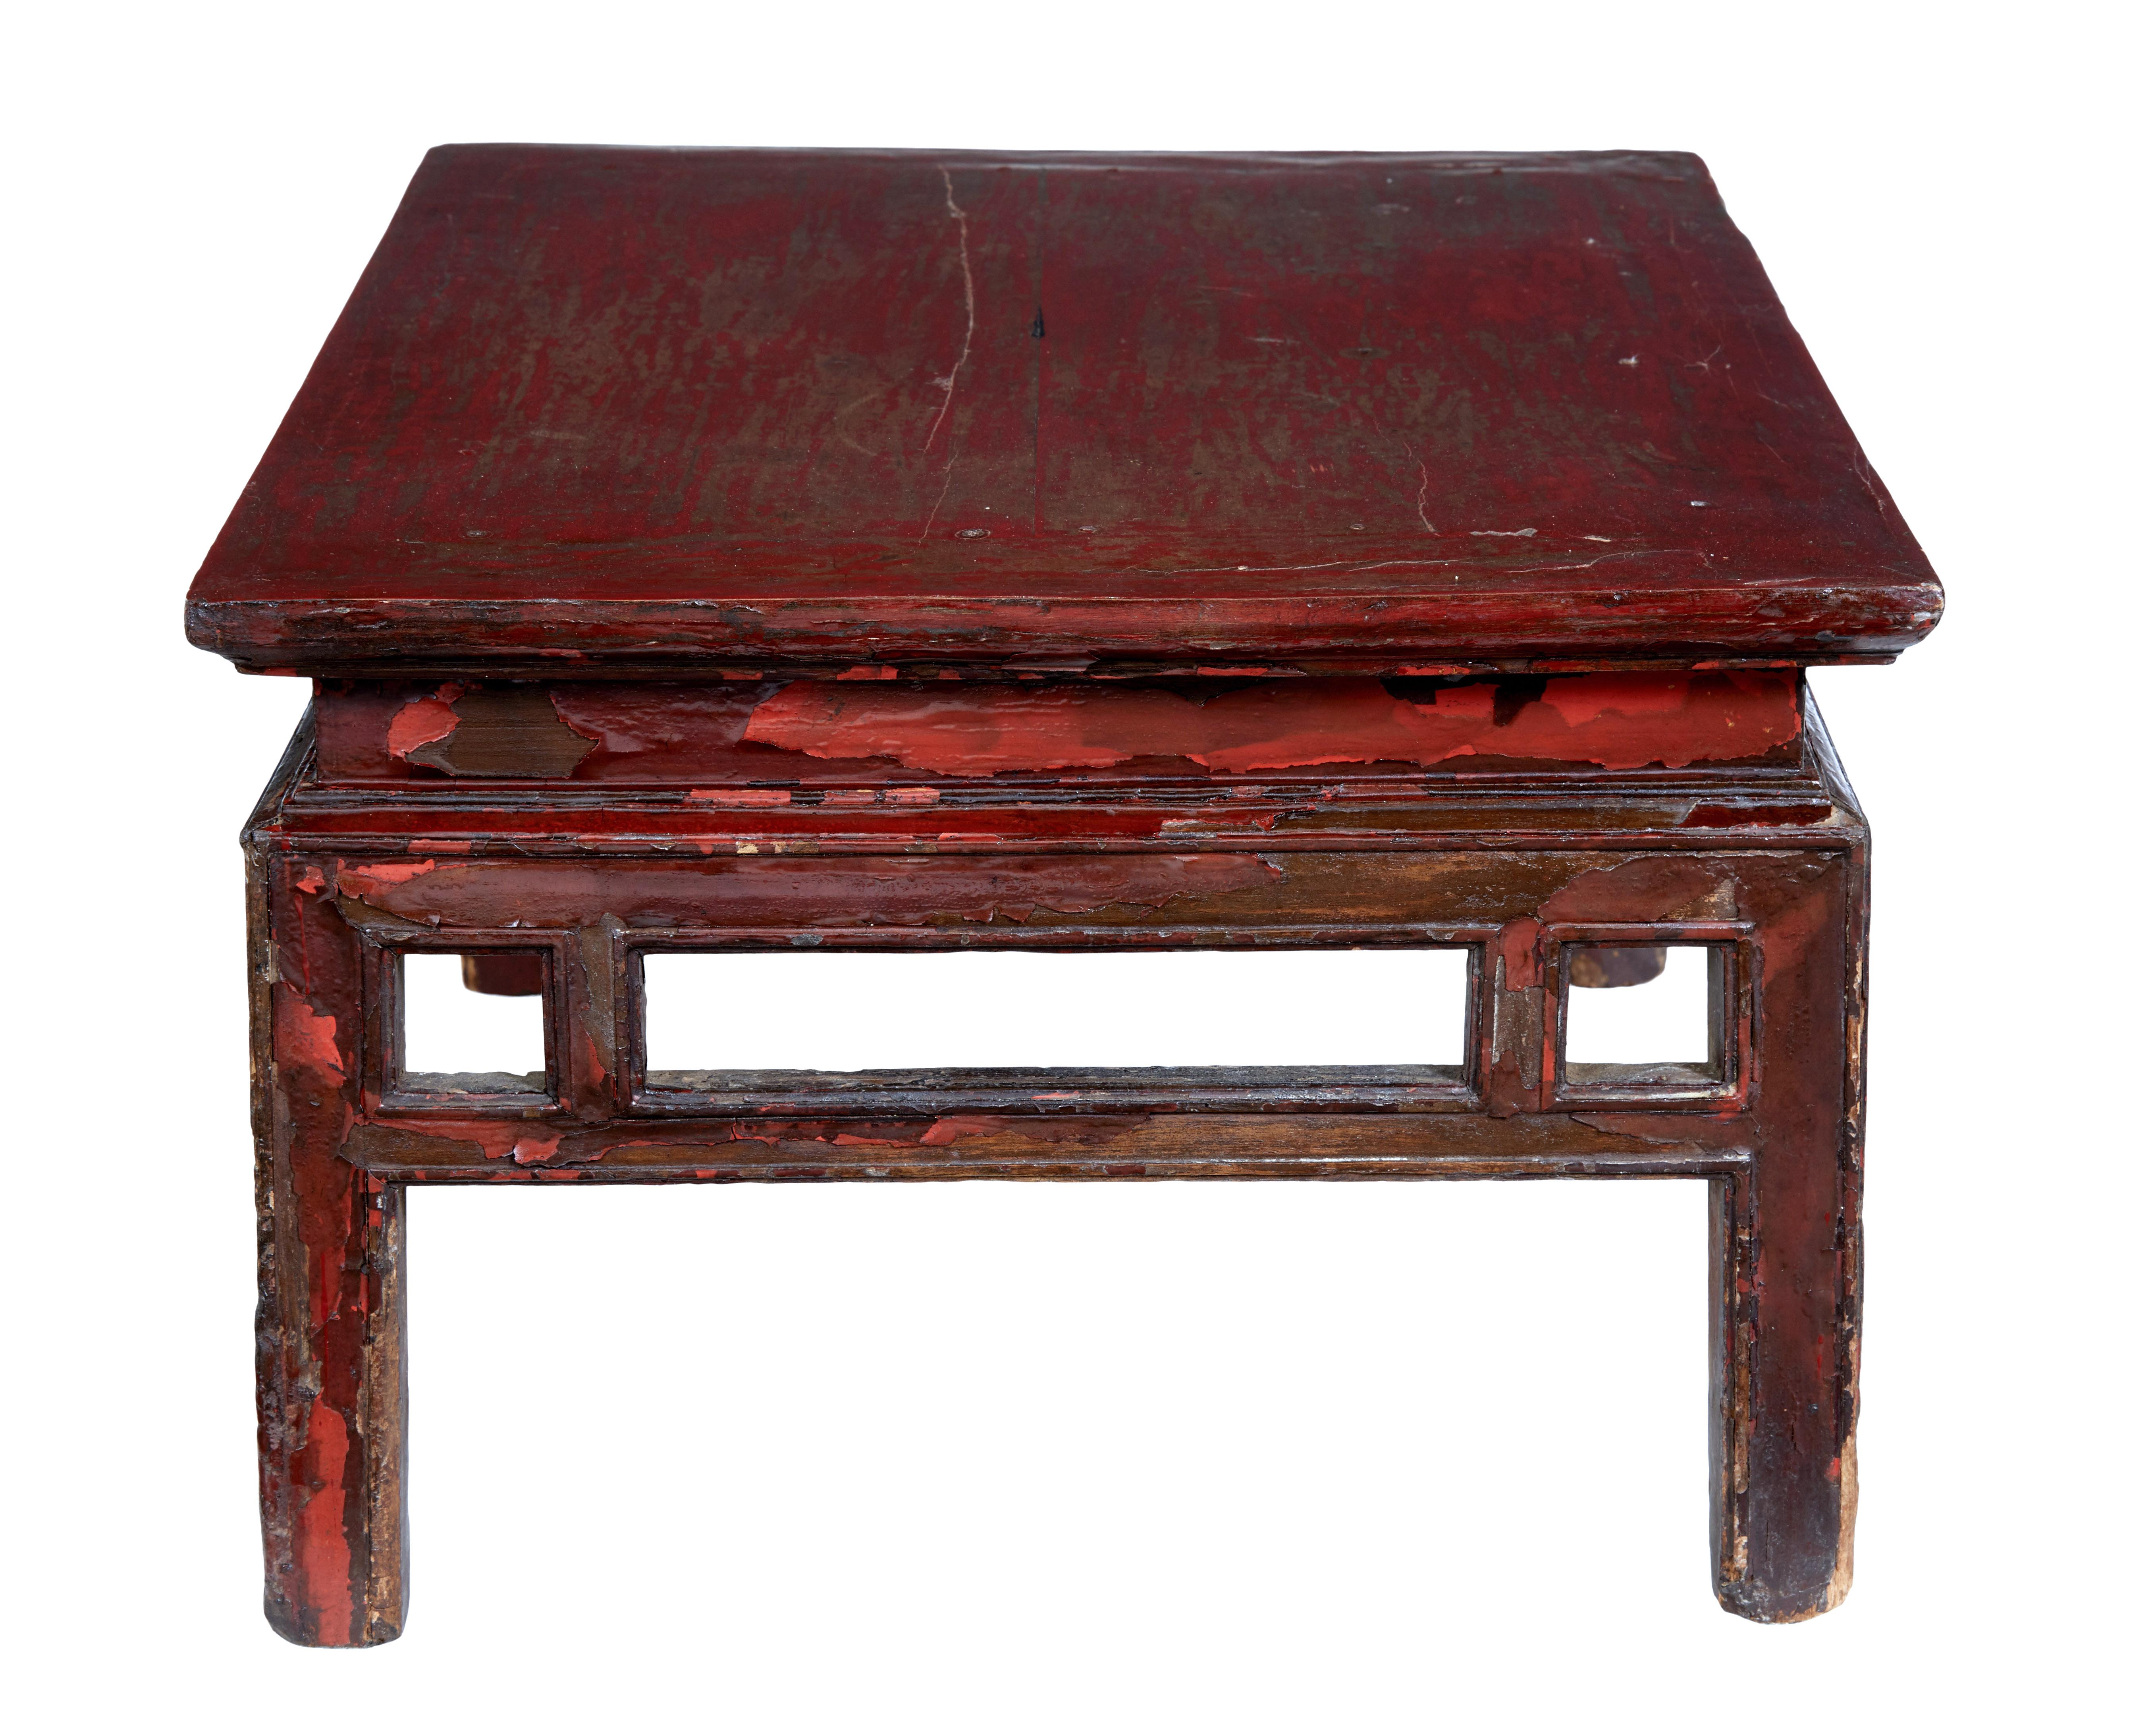 18th century Chinese painted low occasional table, circa 1780.

Here we have a low practical occasional table, richly colored table, with distressed paint showing at least 2 shades, some areas showing complete paint loss. Original condition.